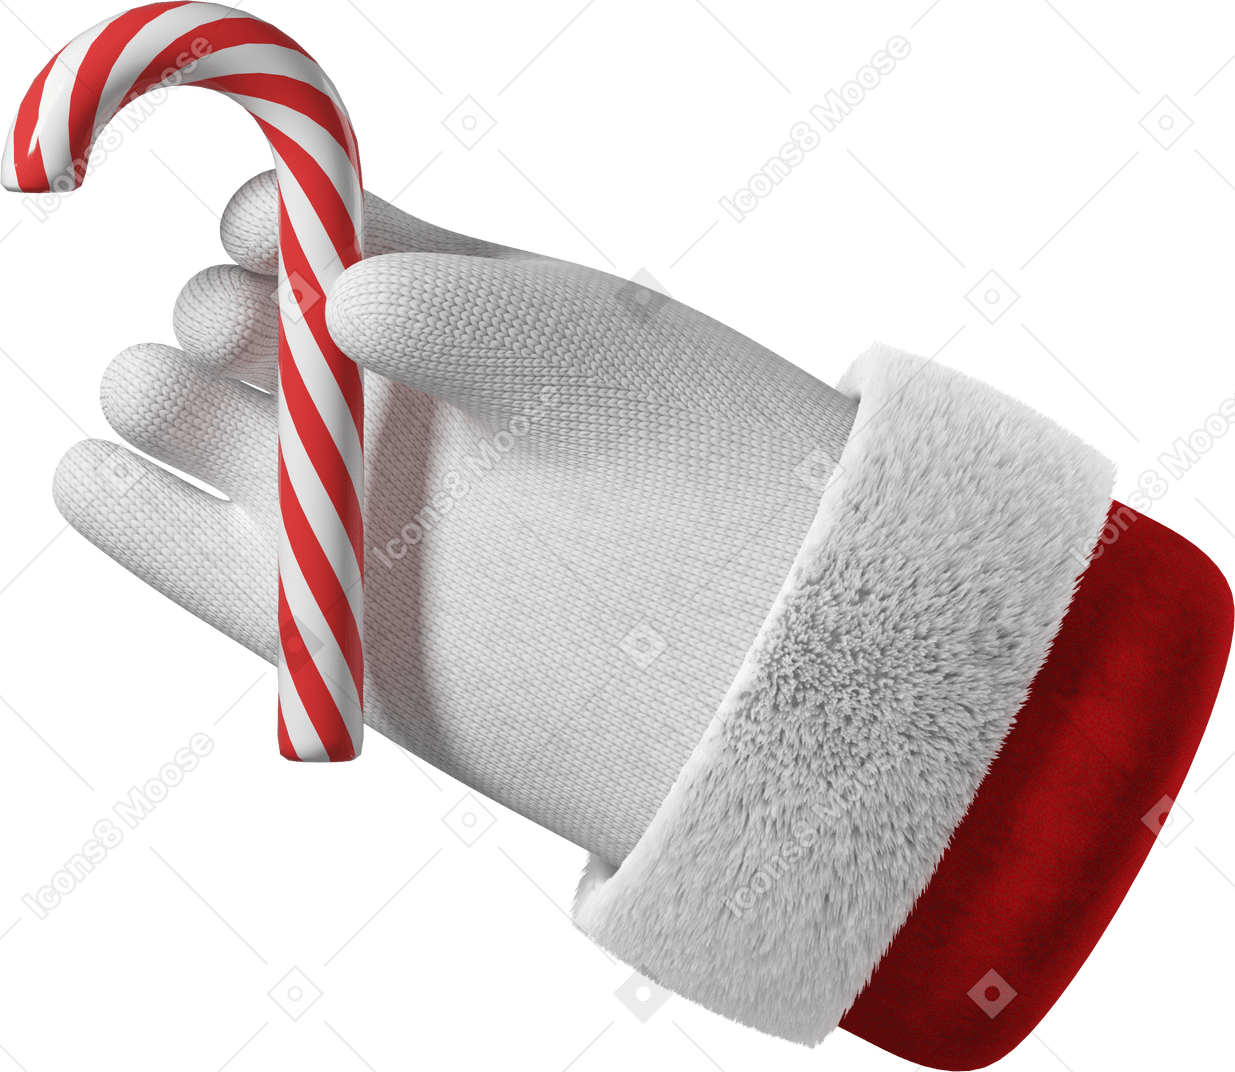 Santa's hand with candy cane